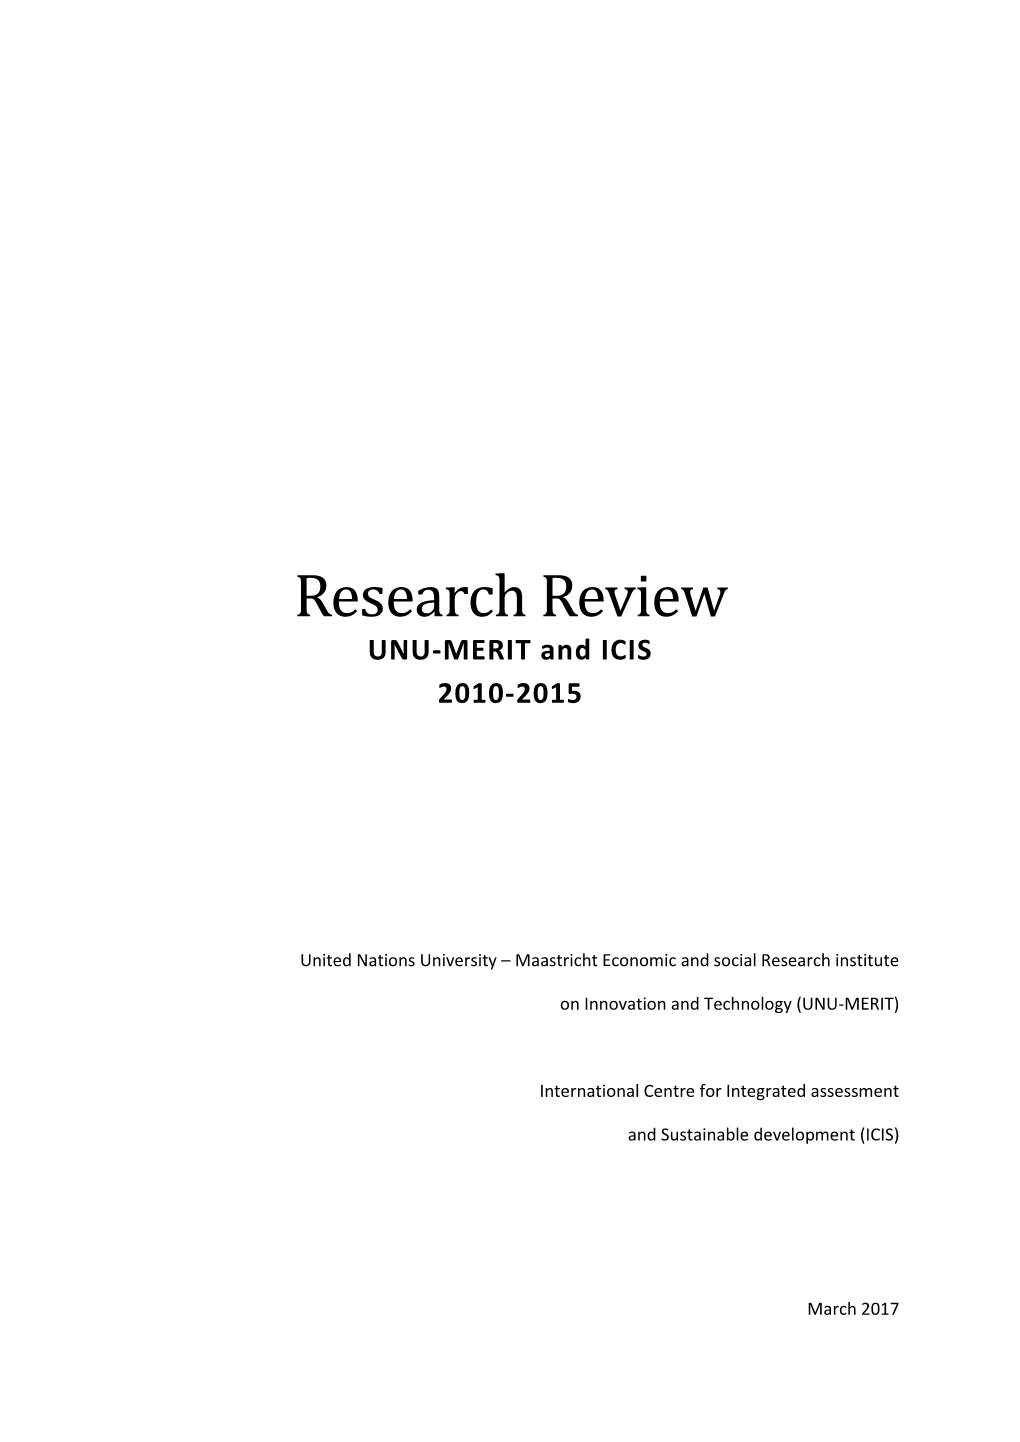 Research Review UNU-MERIT and ICIS 2010-2015